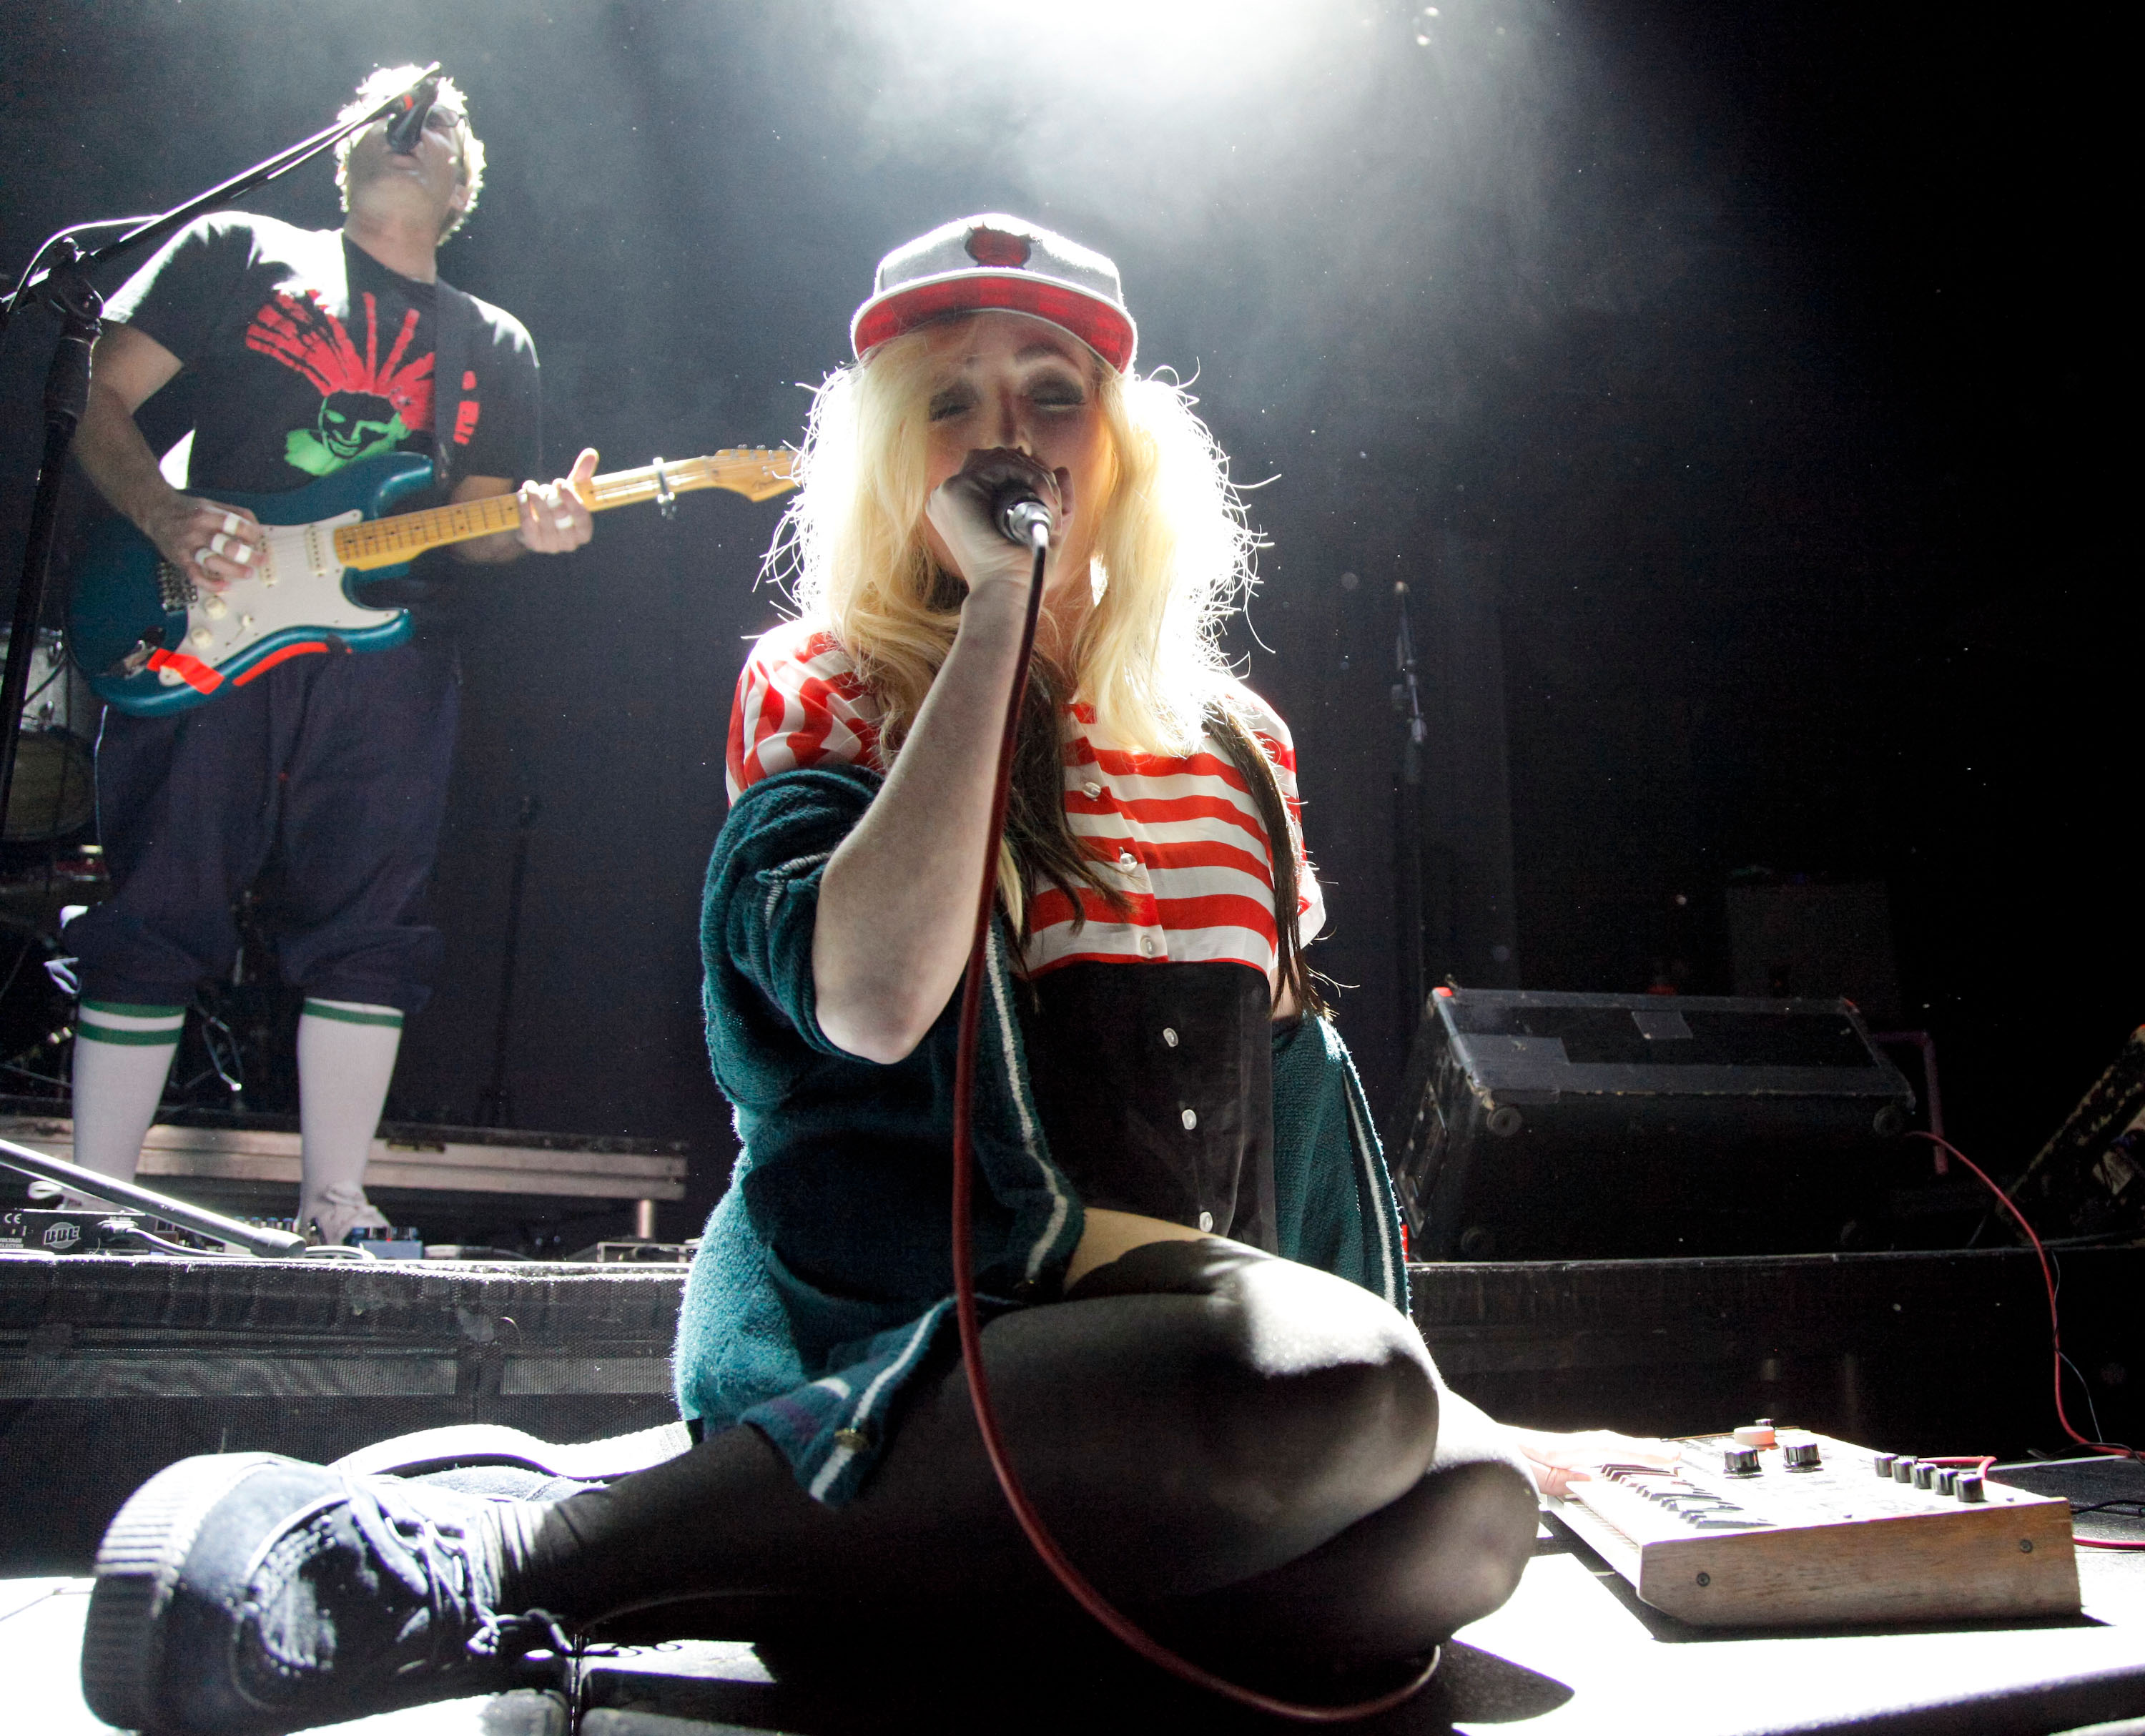 Jules de Martino (L) and Katie White of The Ting Tings perform onstage at The Mayan on March 22, 2012 in Los Angeles. (Imeh Akpanudosen—Getty Images)